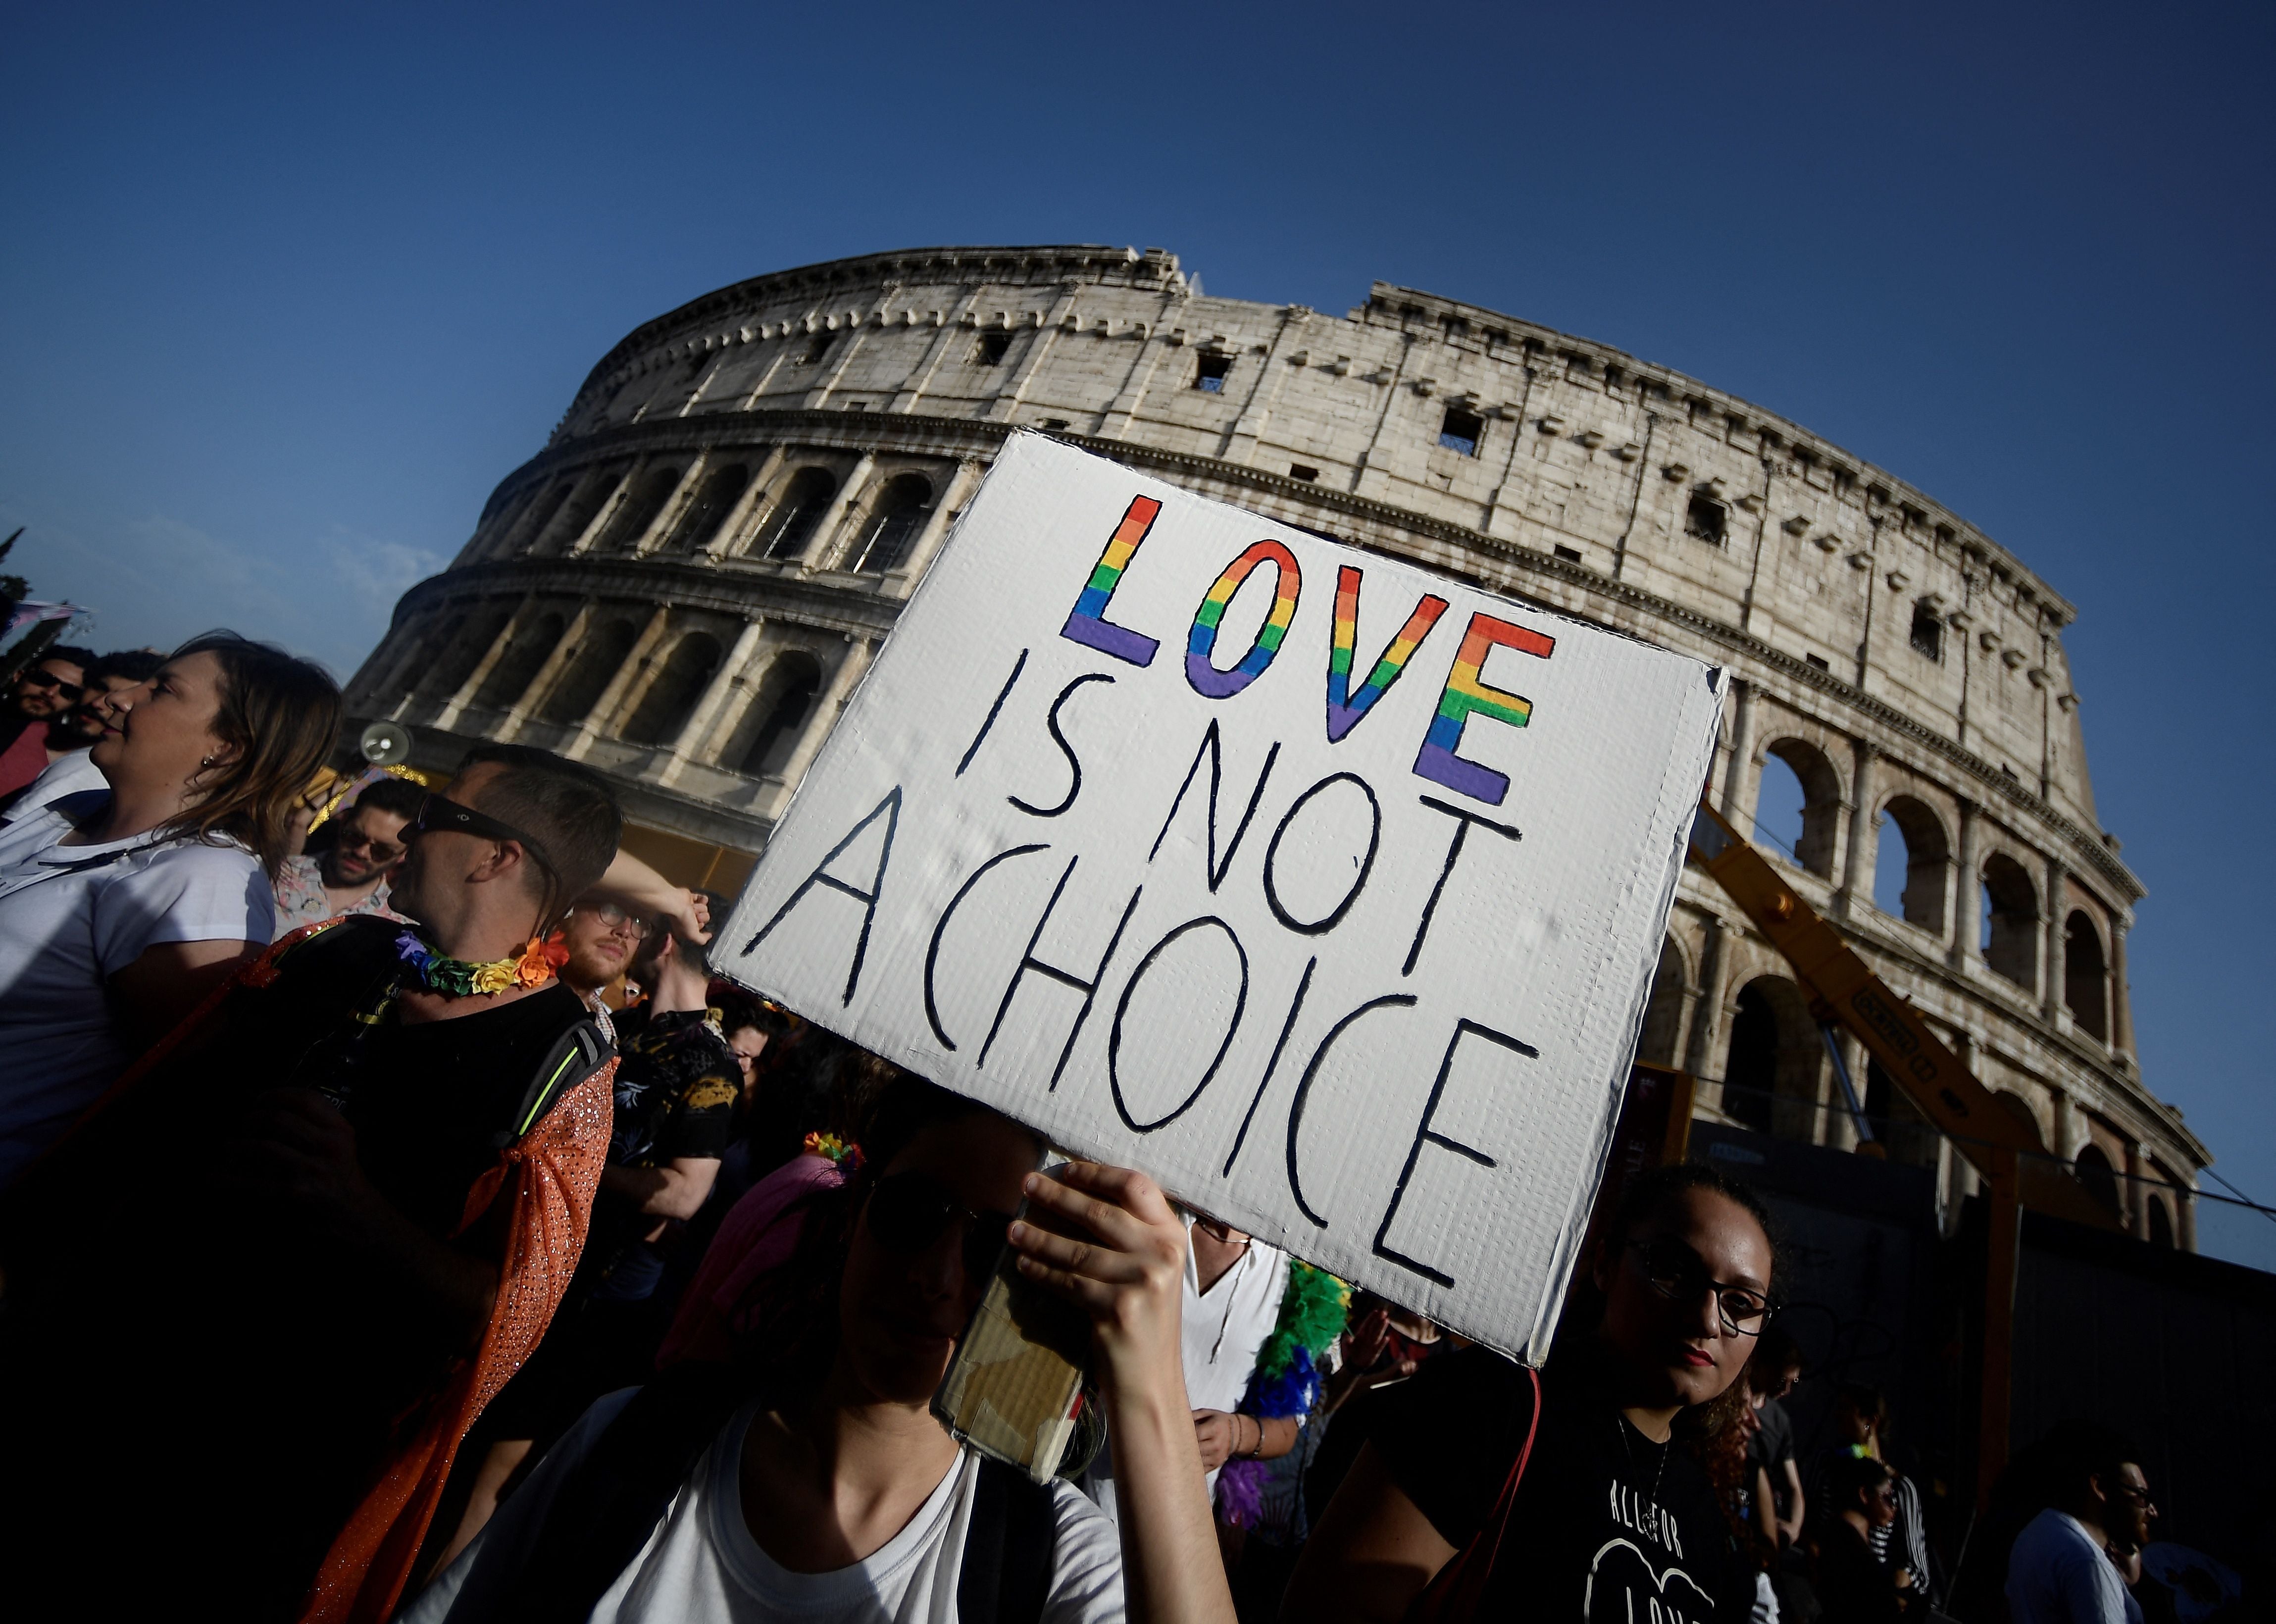 Participants walk past the Colosseum monument in Rome during the annual Gay Pride parade